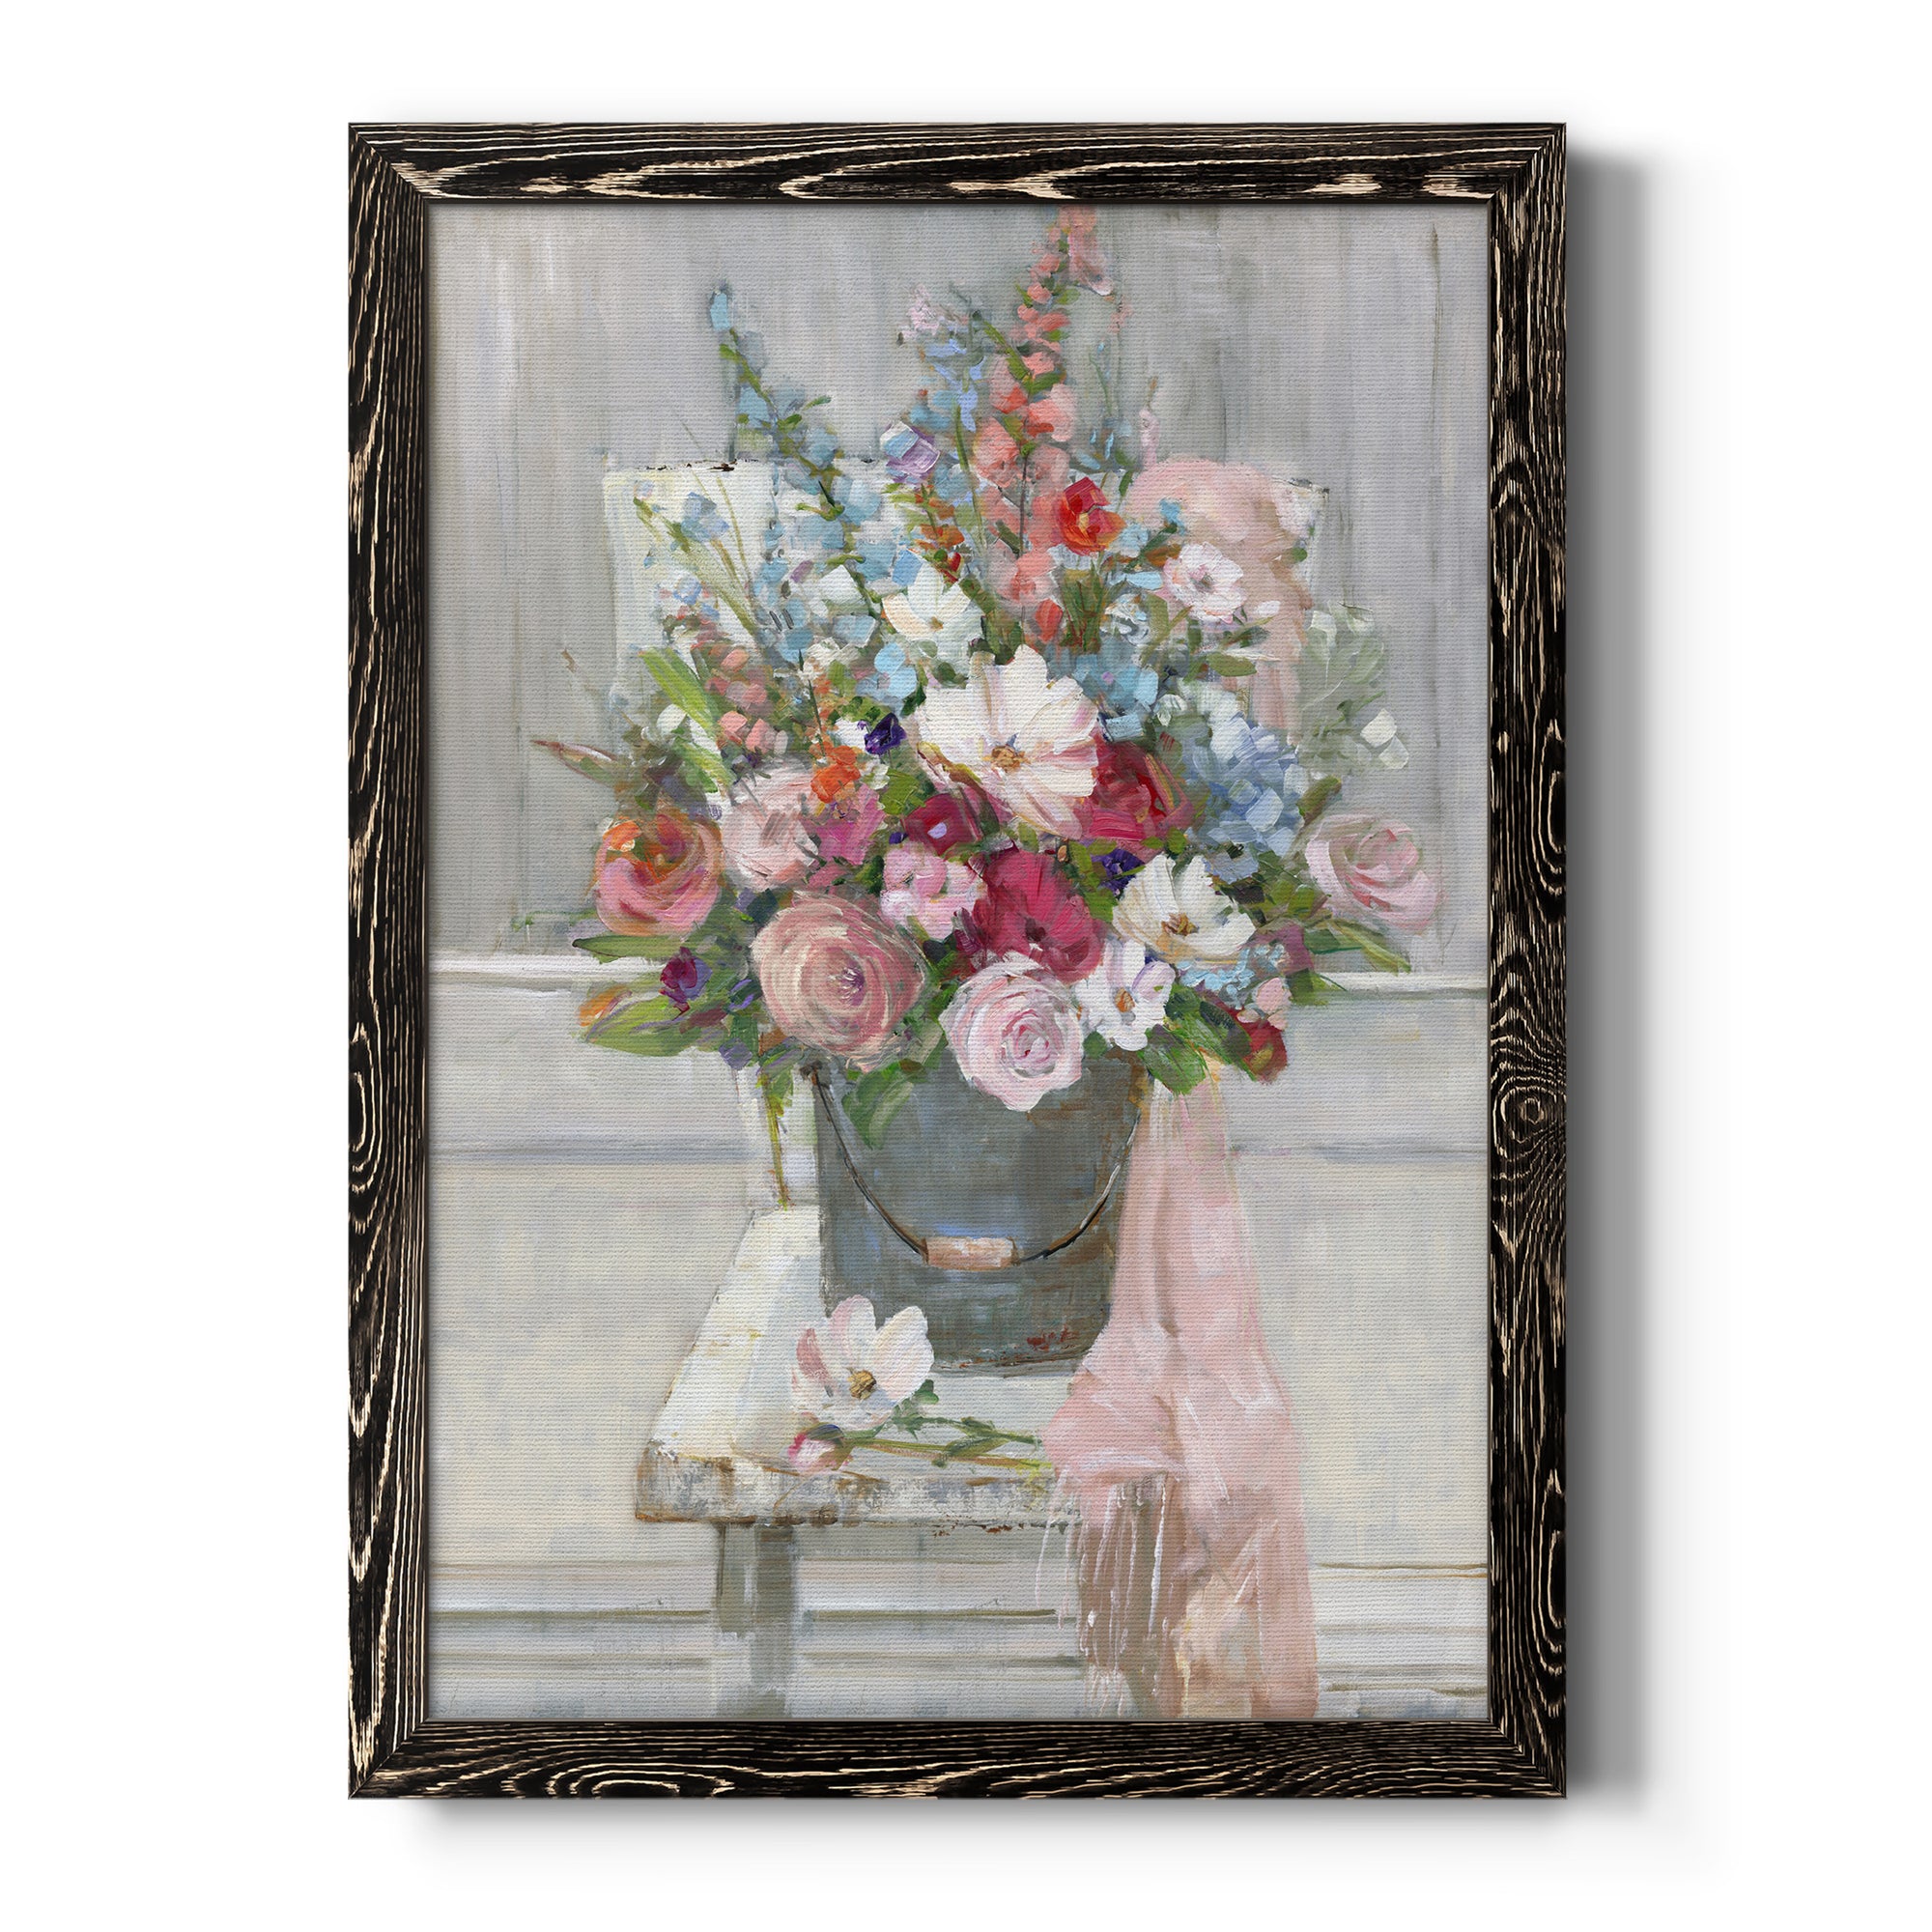 Sit Down For A Spell - Premium Canvas Framed in Barnwood - Ready to Hang